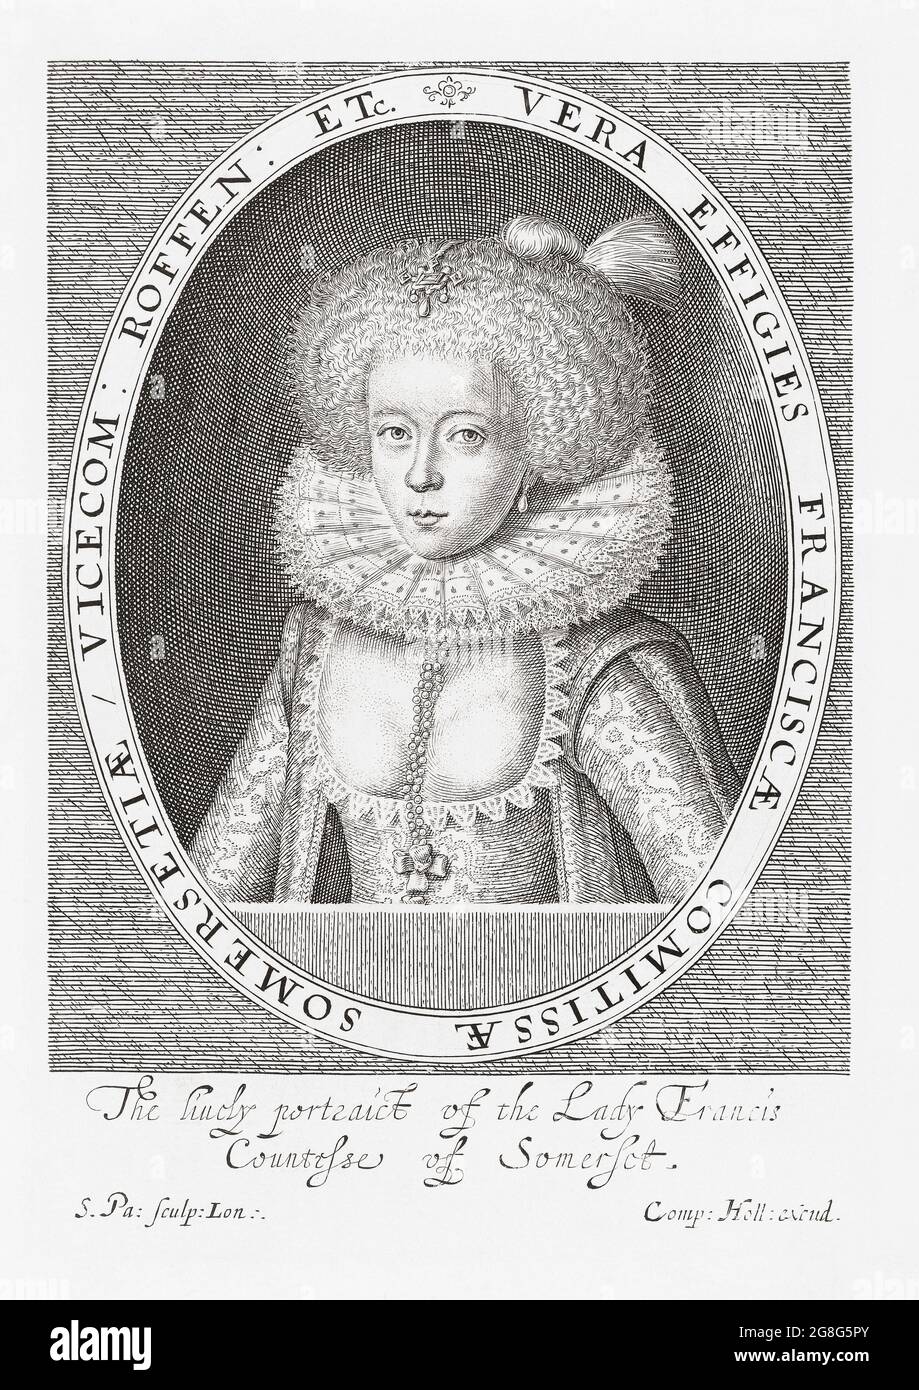 Frances Carr, Countess of Somerset, 1590 - 1632.  The countess and her husband were found guilty of murder in a famous scandal during the reign of King James I.  After an early 17th century print by Simon van de Passe. Stock Photo